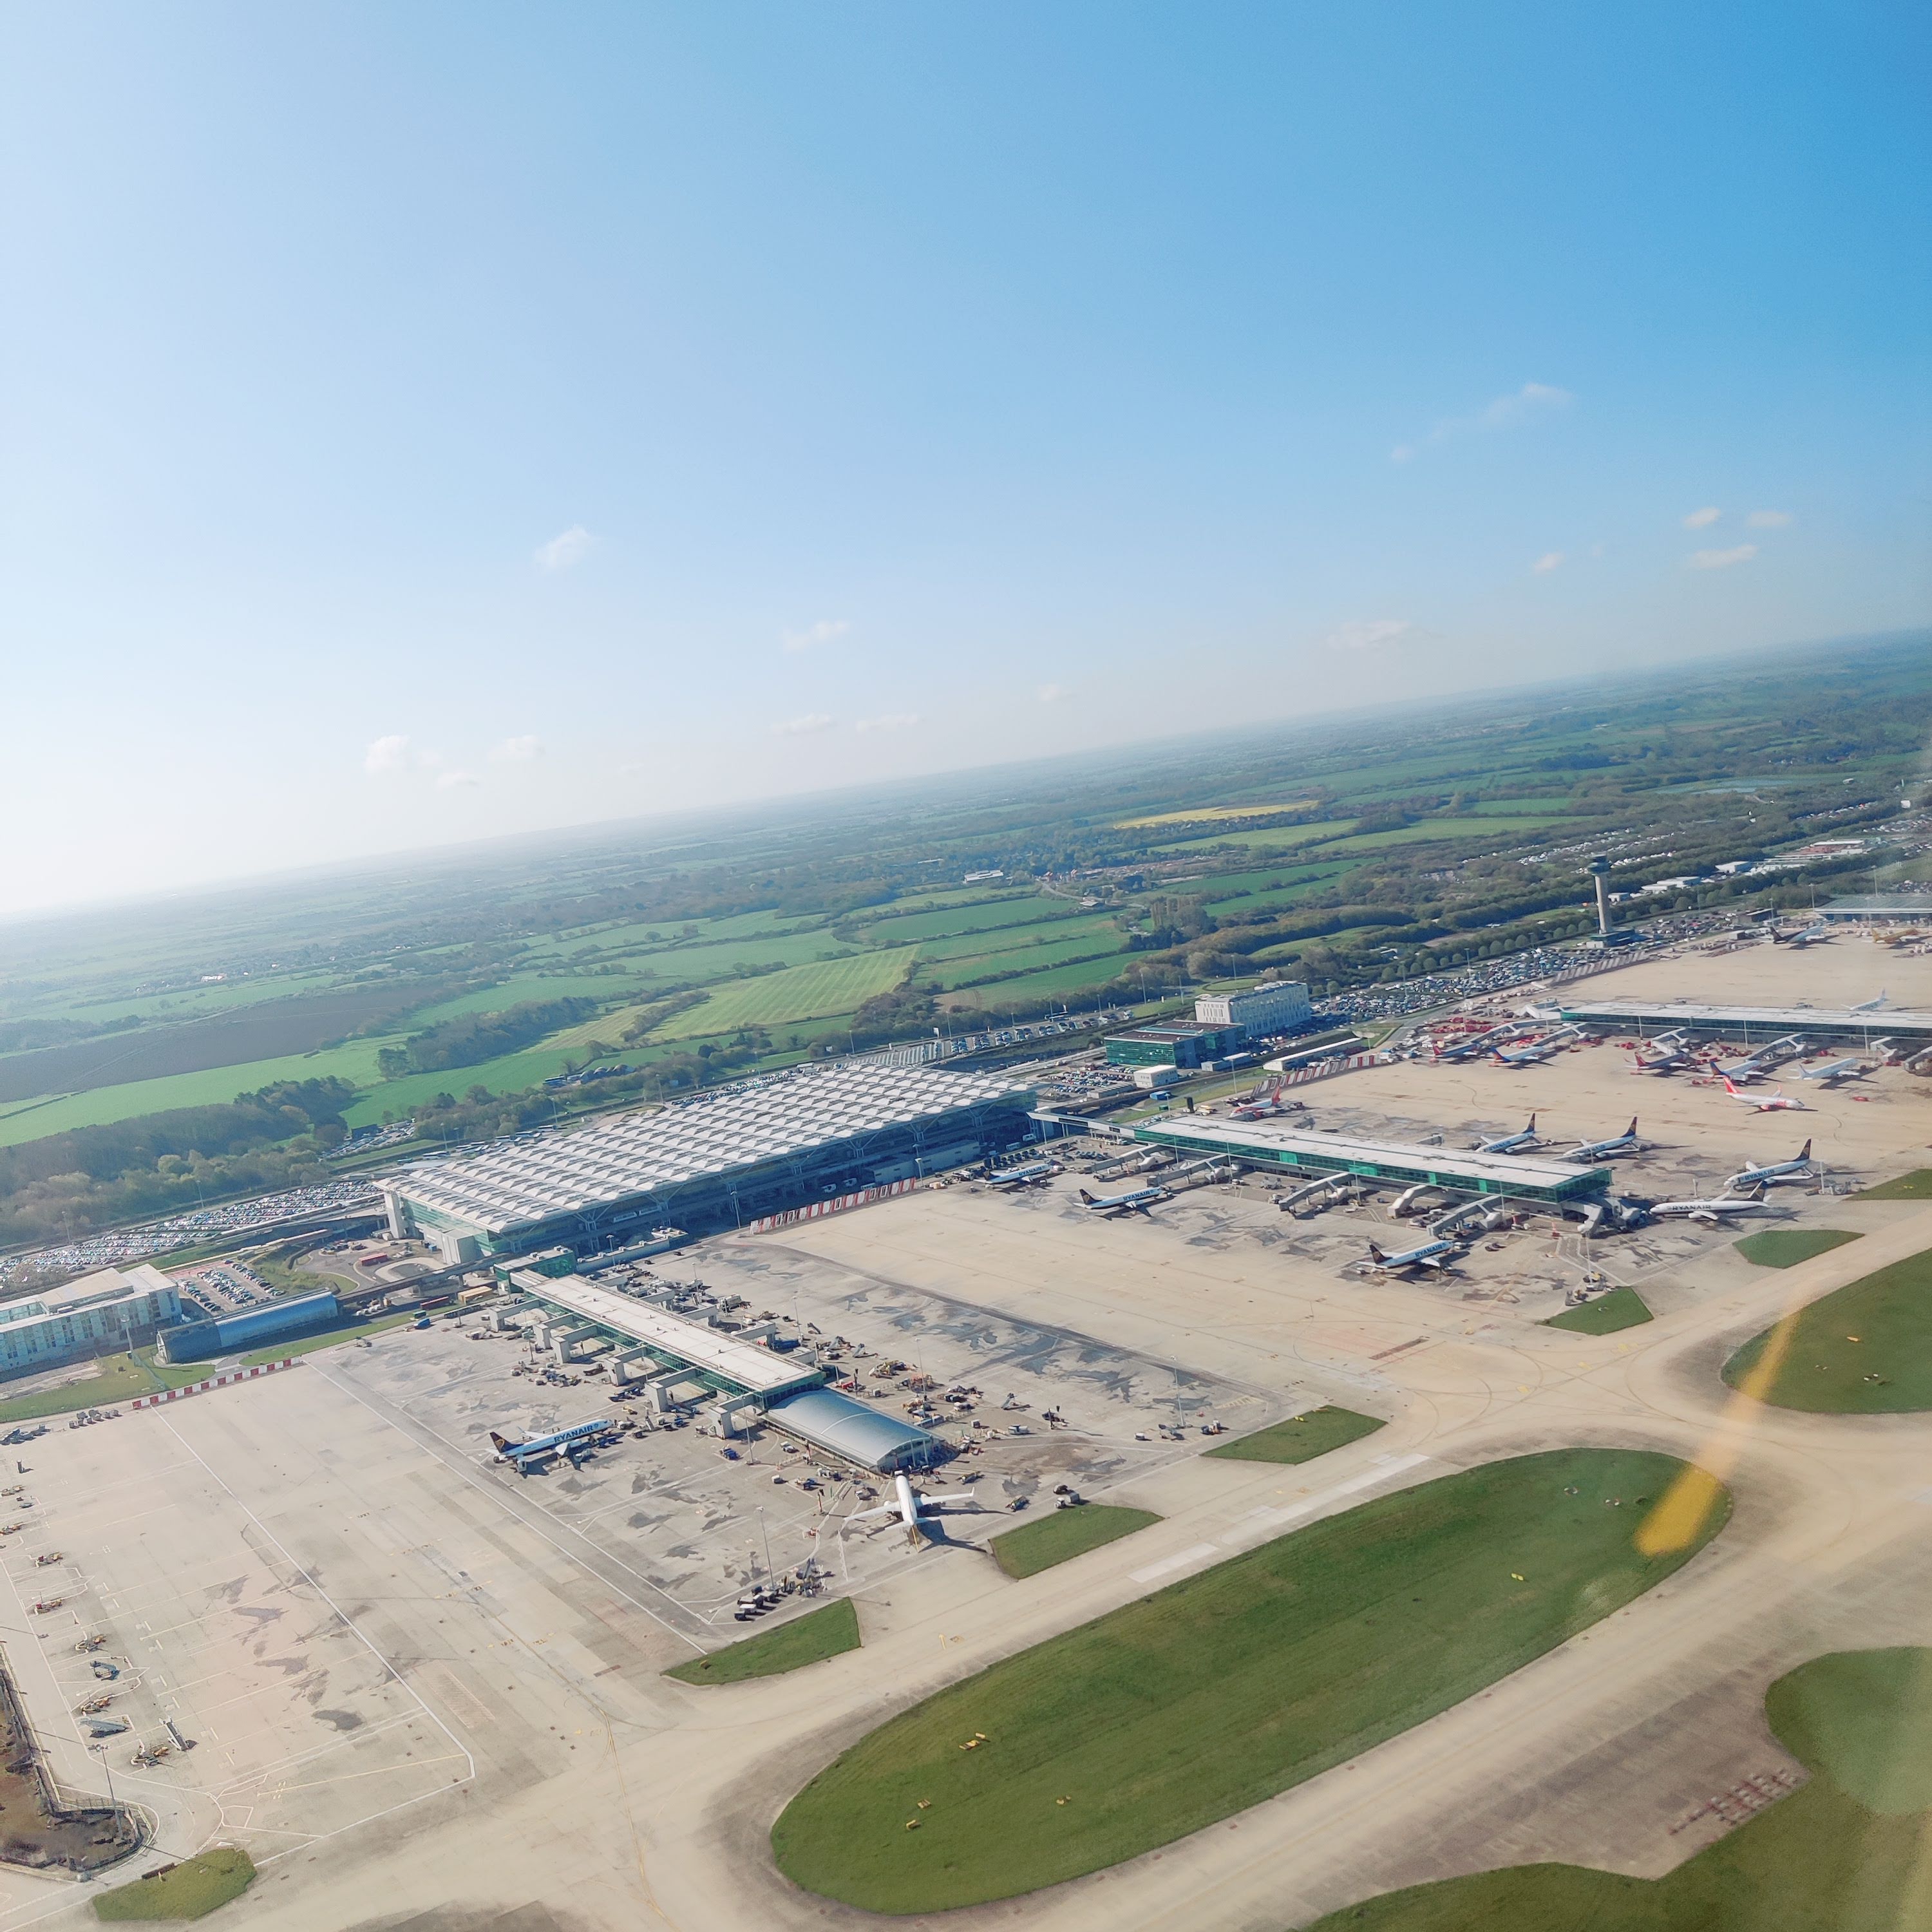 A view of Stansted airport from the sky.